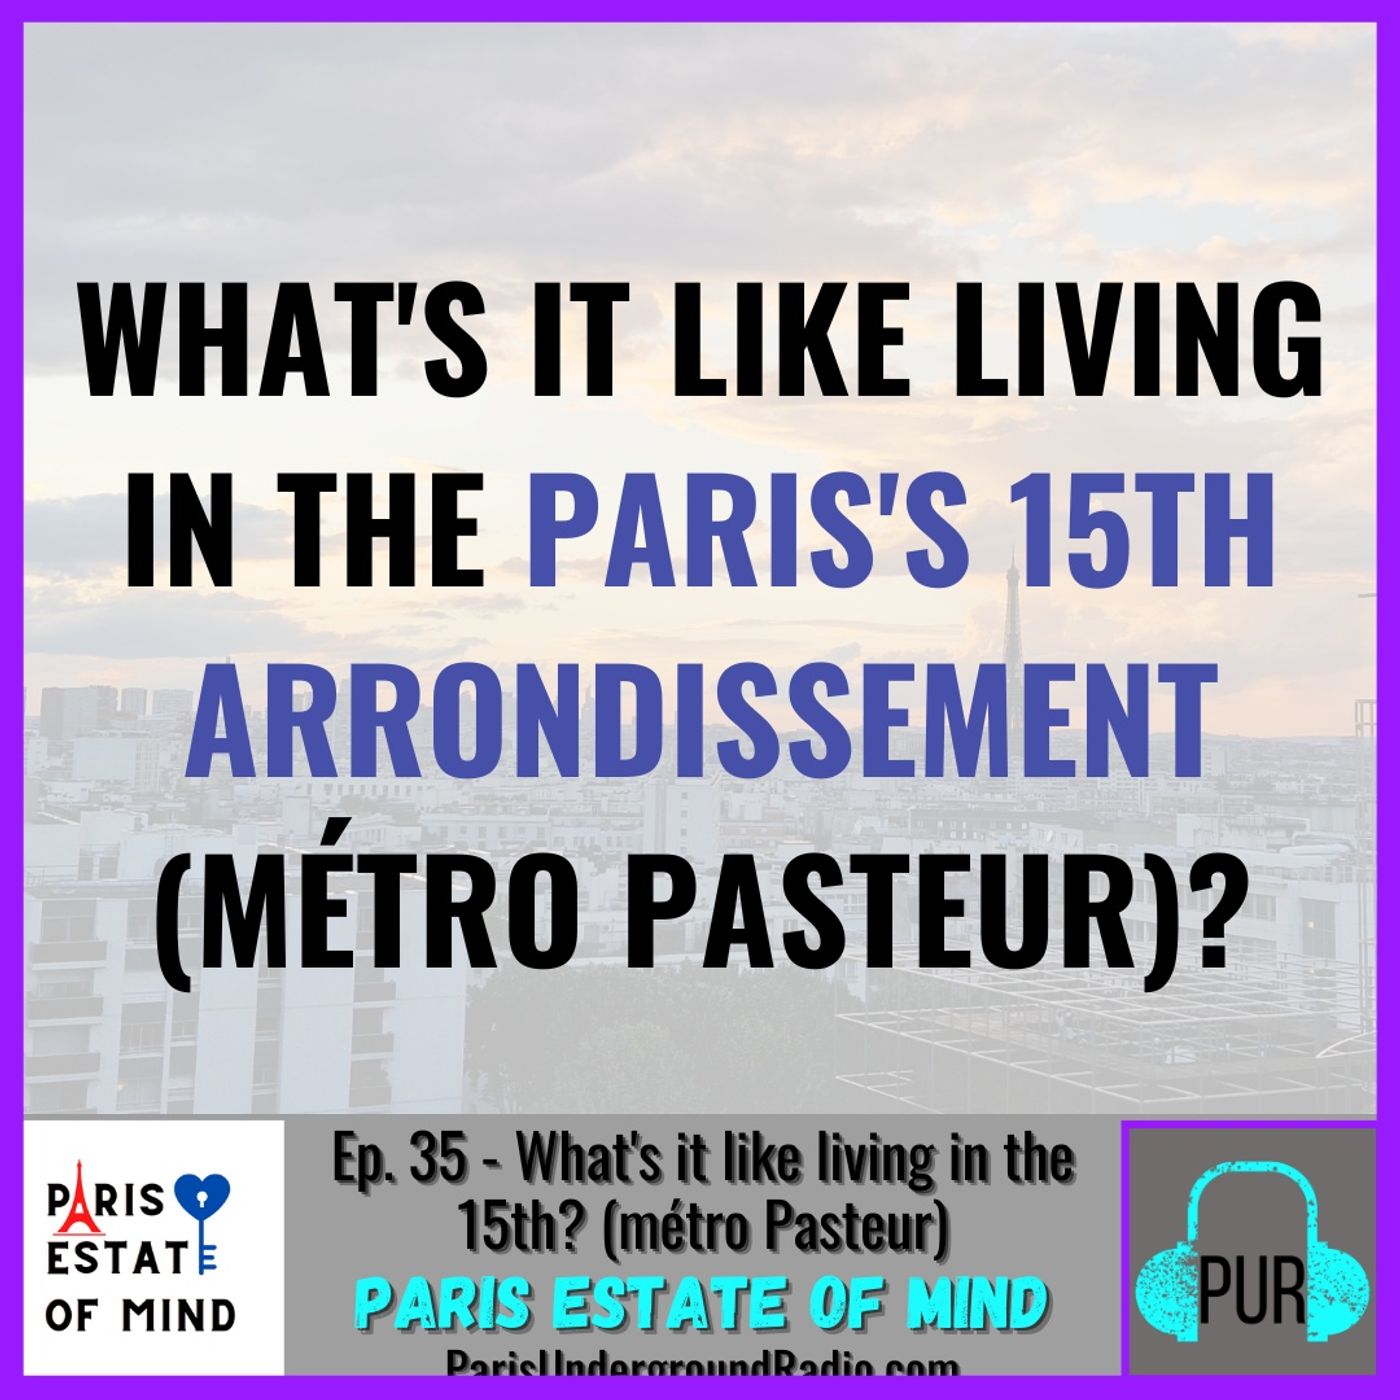 What's it like living in the 15th? (métro Pasteur)